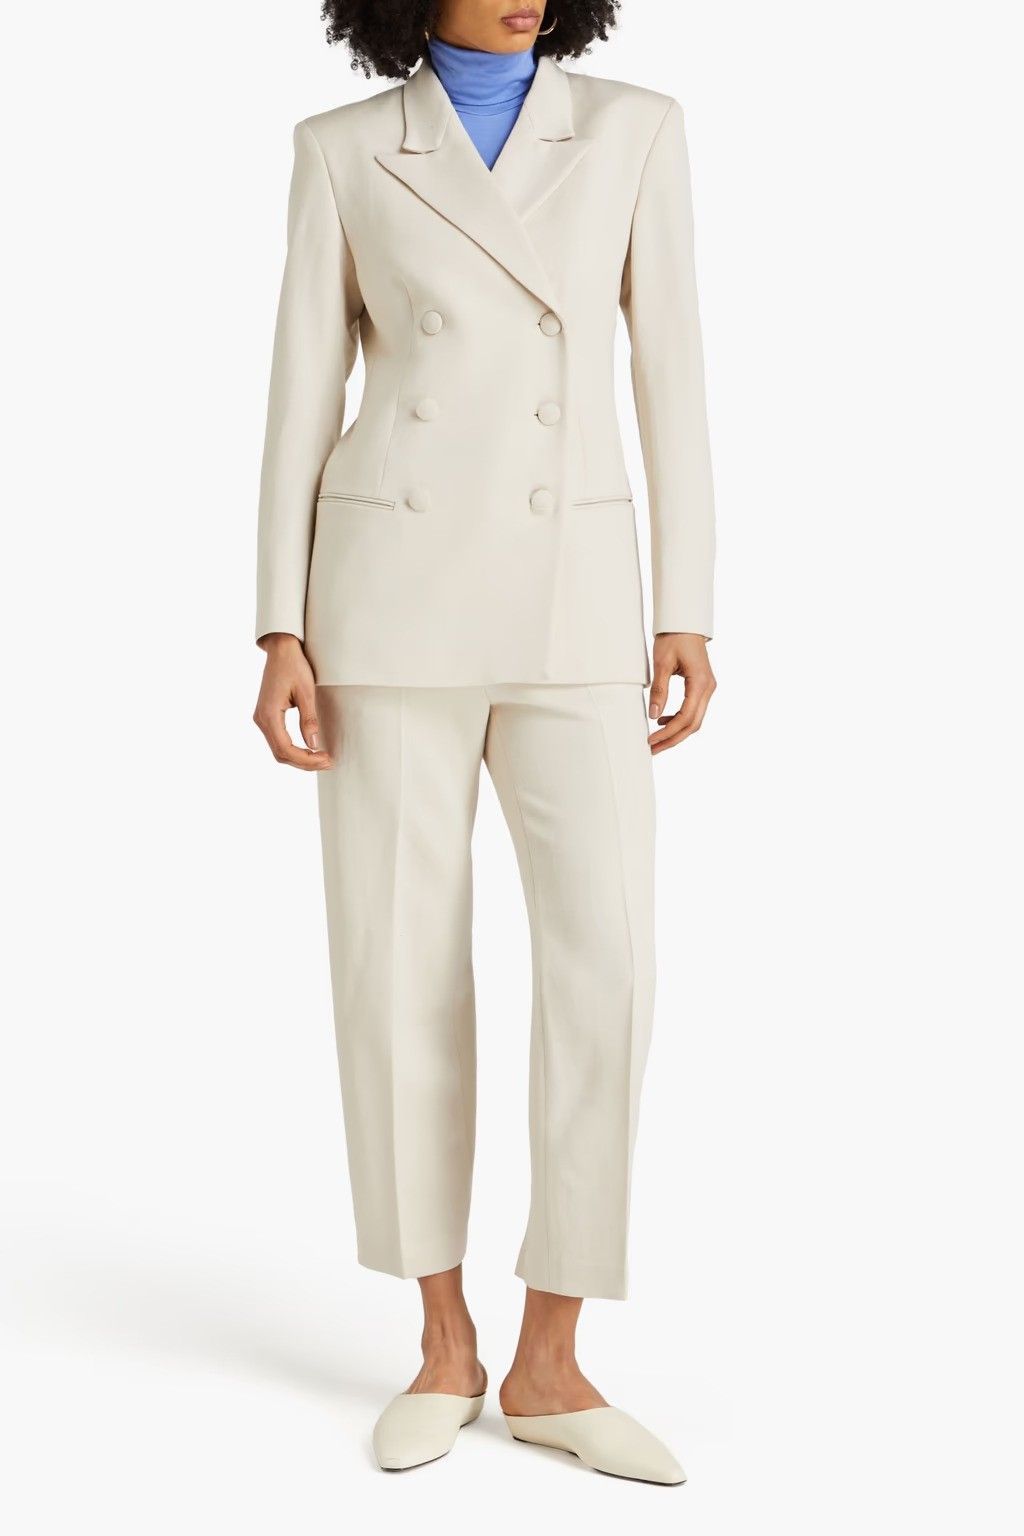 The 9 Best Suit Brands That Cater to Brides of All Sizes and Styles